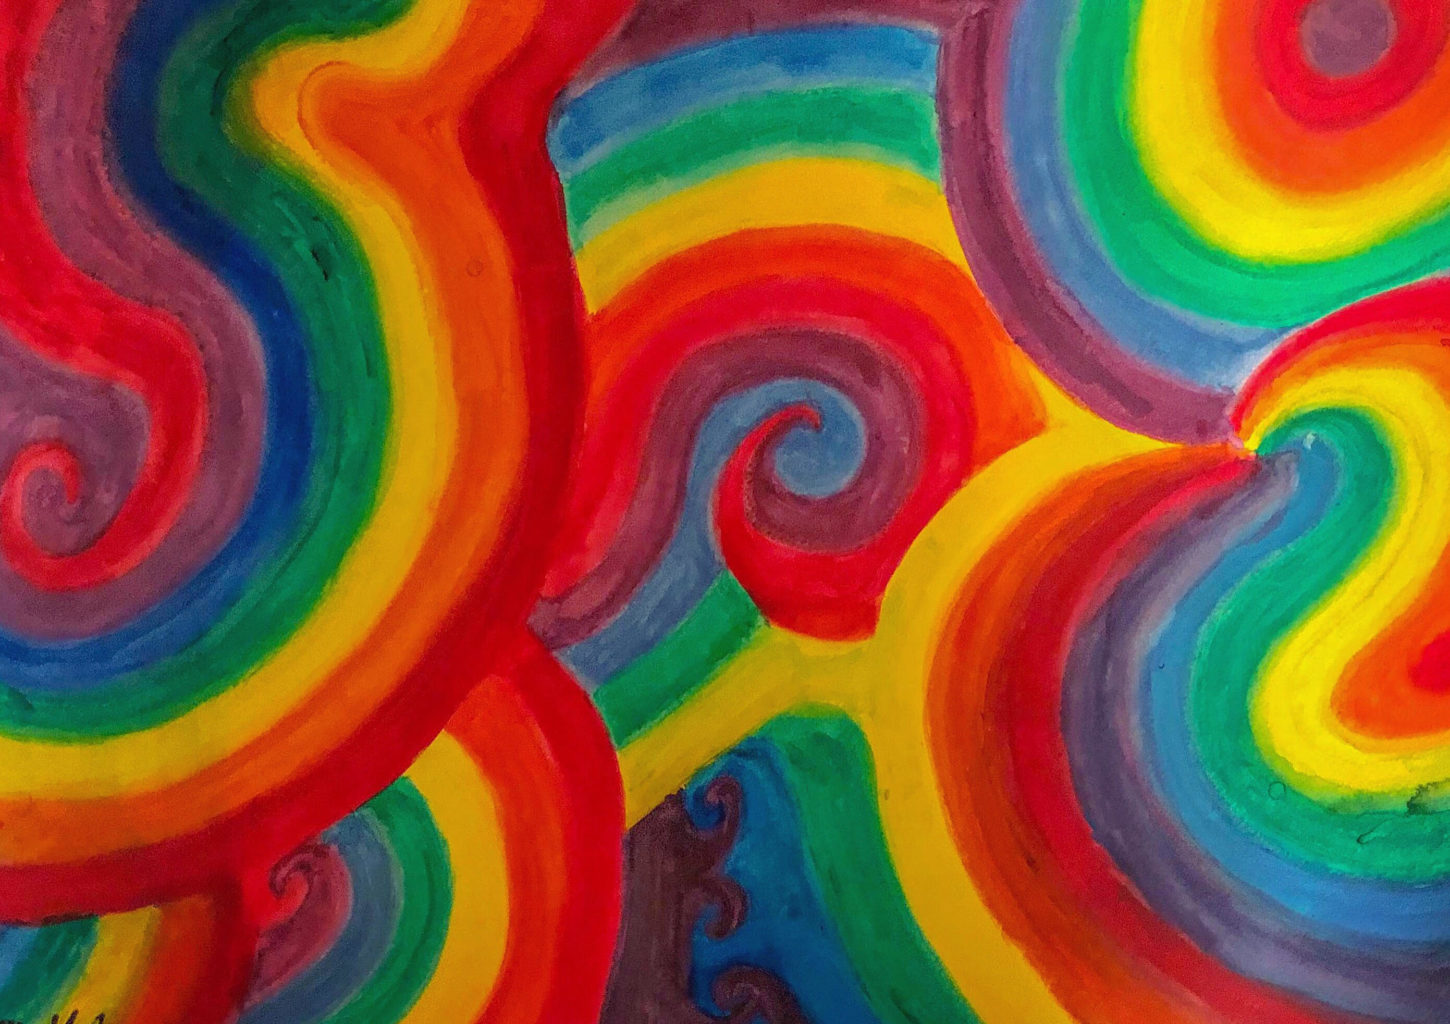 Surrebral Twirling Colors painting